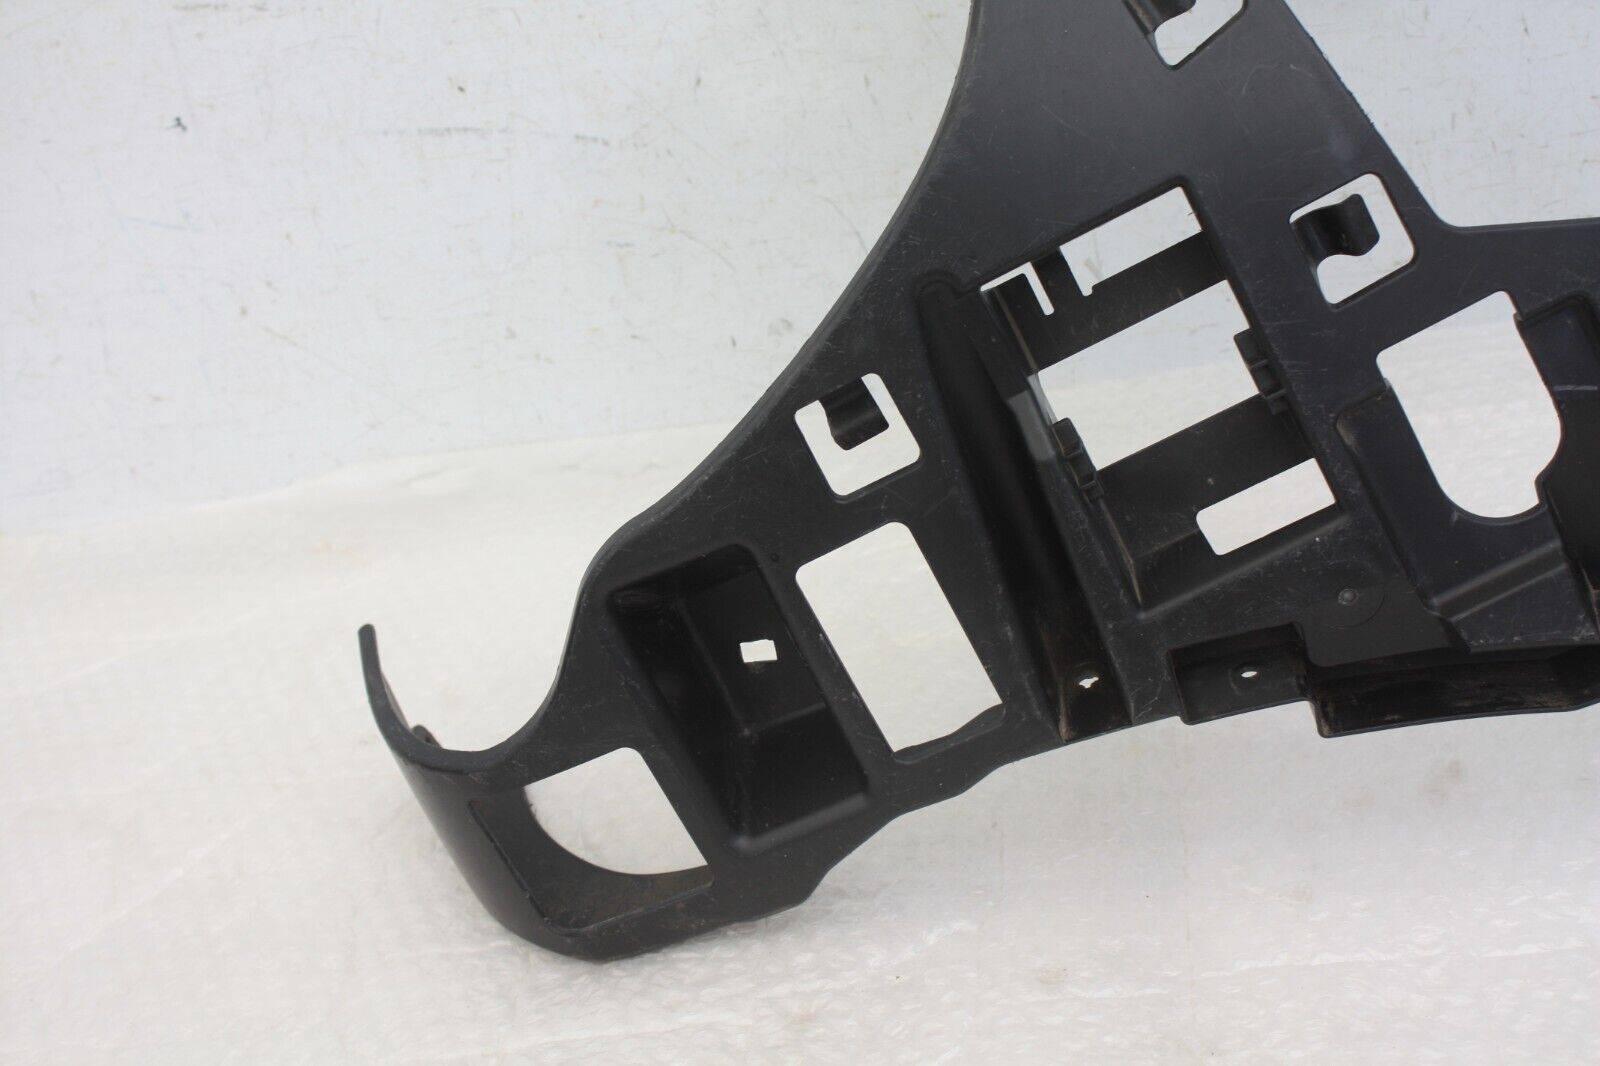 Mercedes-S-Class-W222-AMG-Front-Bumper-Left-Bracket-2017-TO-2021-A2228856800-176352019956-4